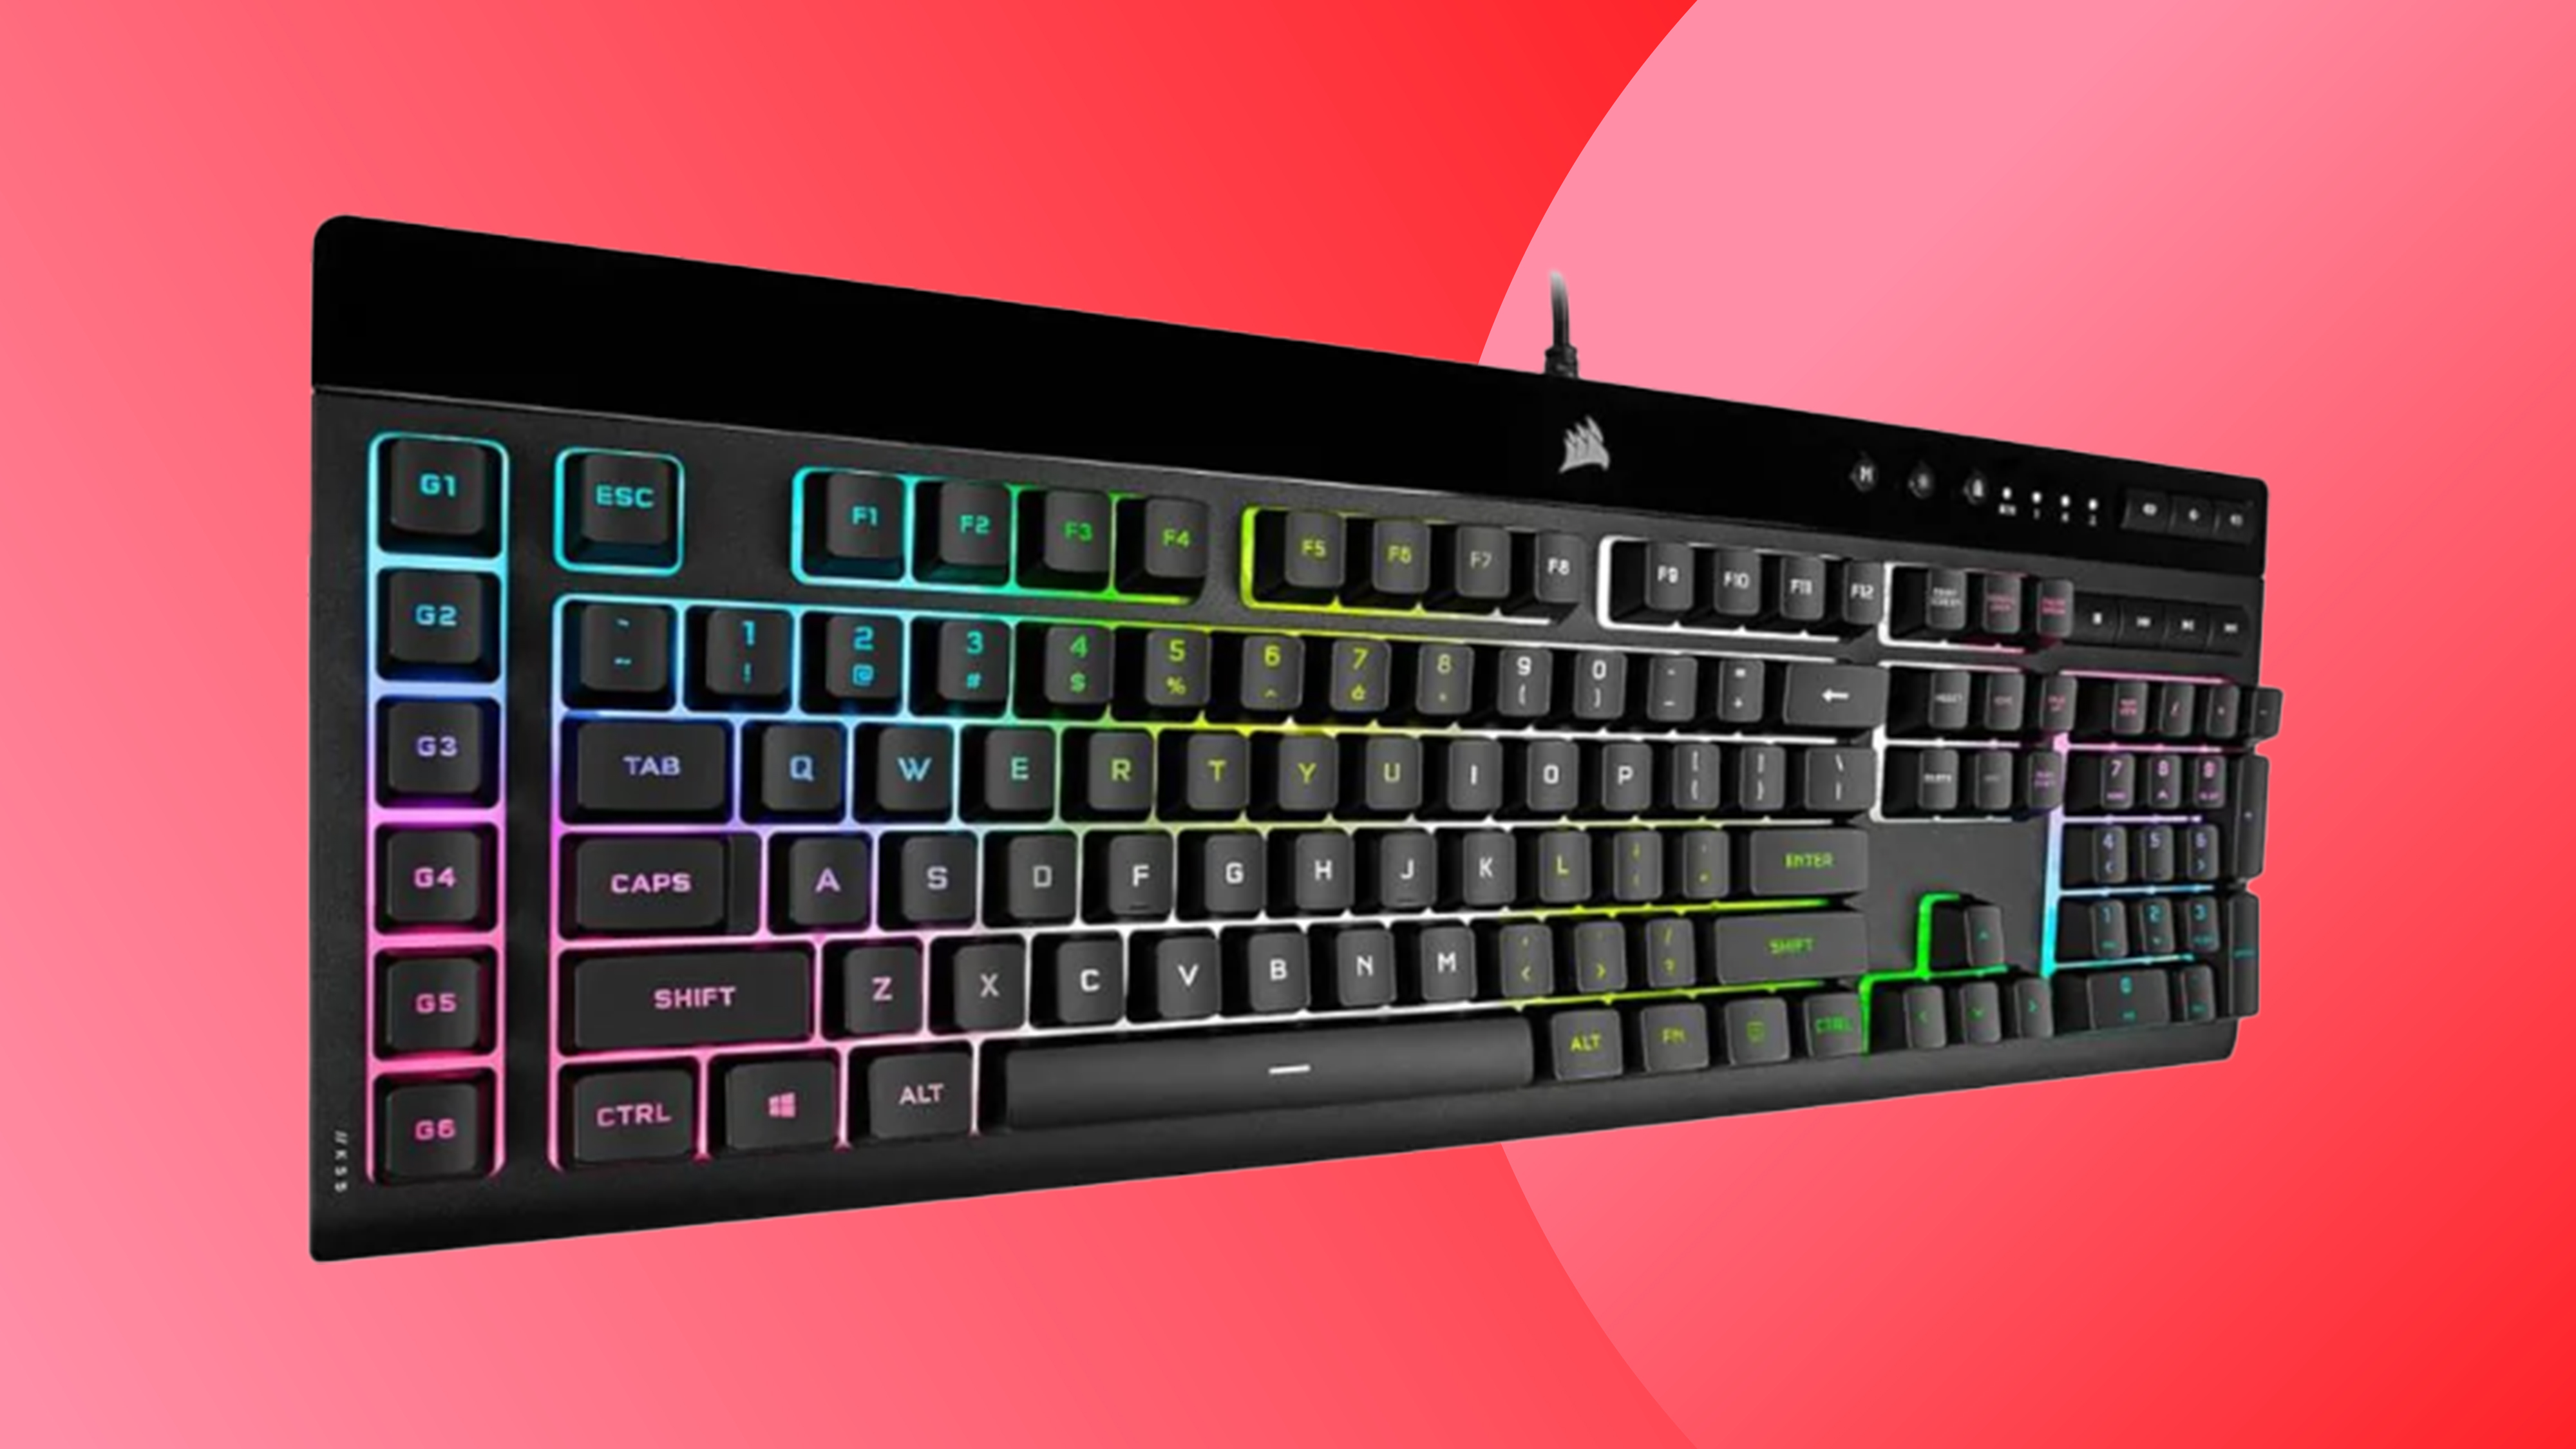 A Corsair Black Friday deals image with a Corsair K55 RGB Pro XT keyboard on a red background